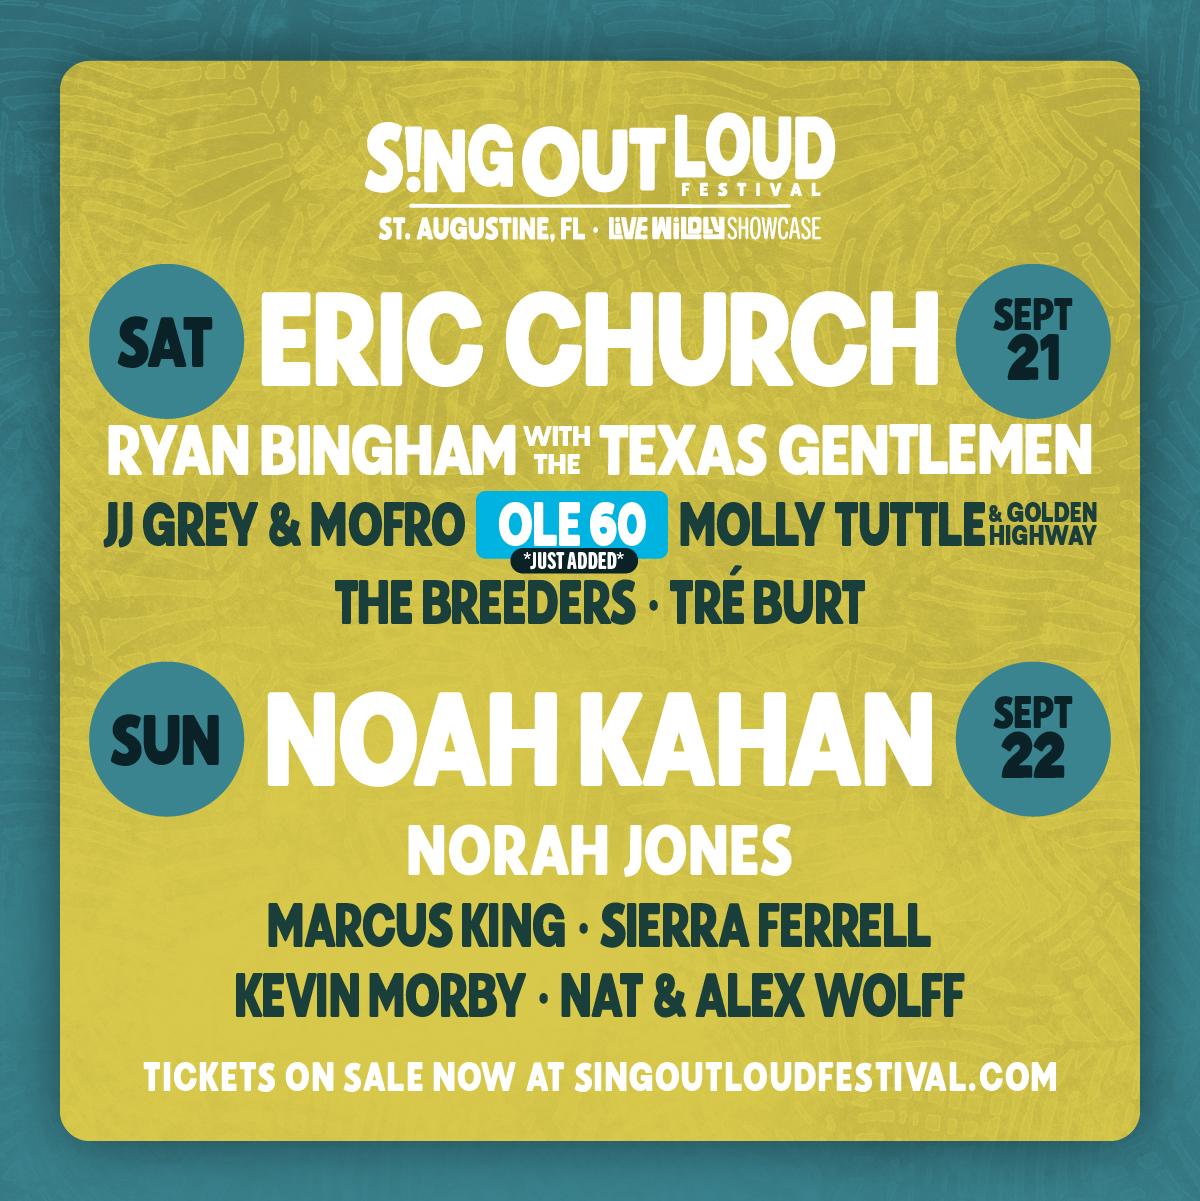 Sing Out Loud Live Wildly SHowcasr Lineup